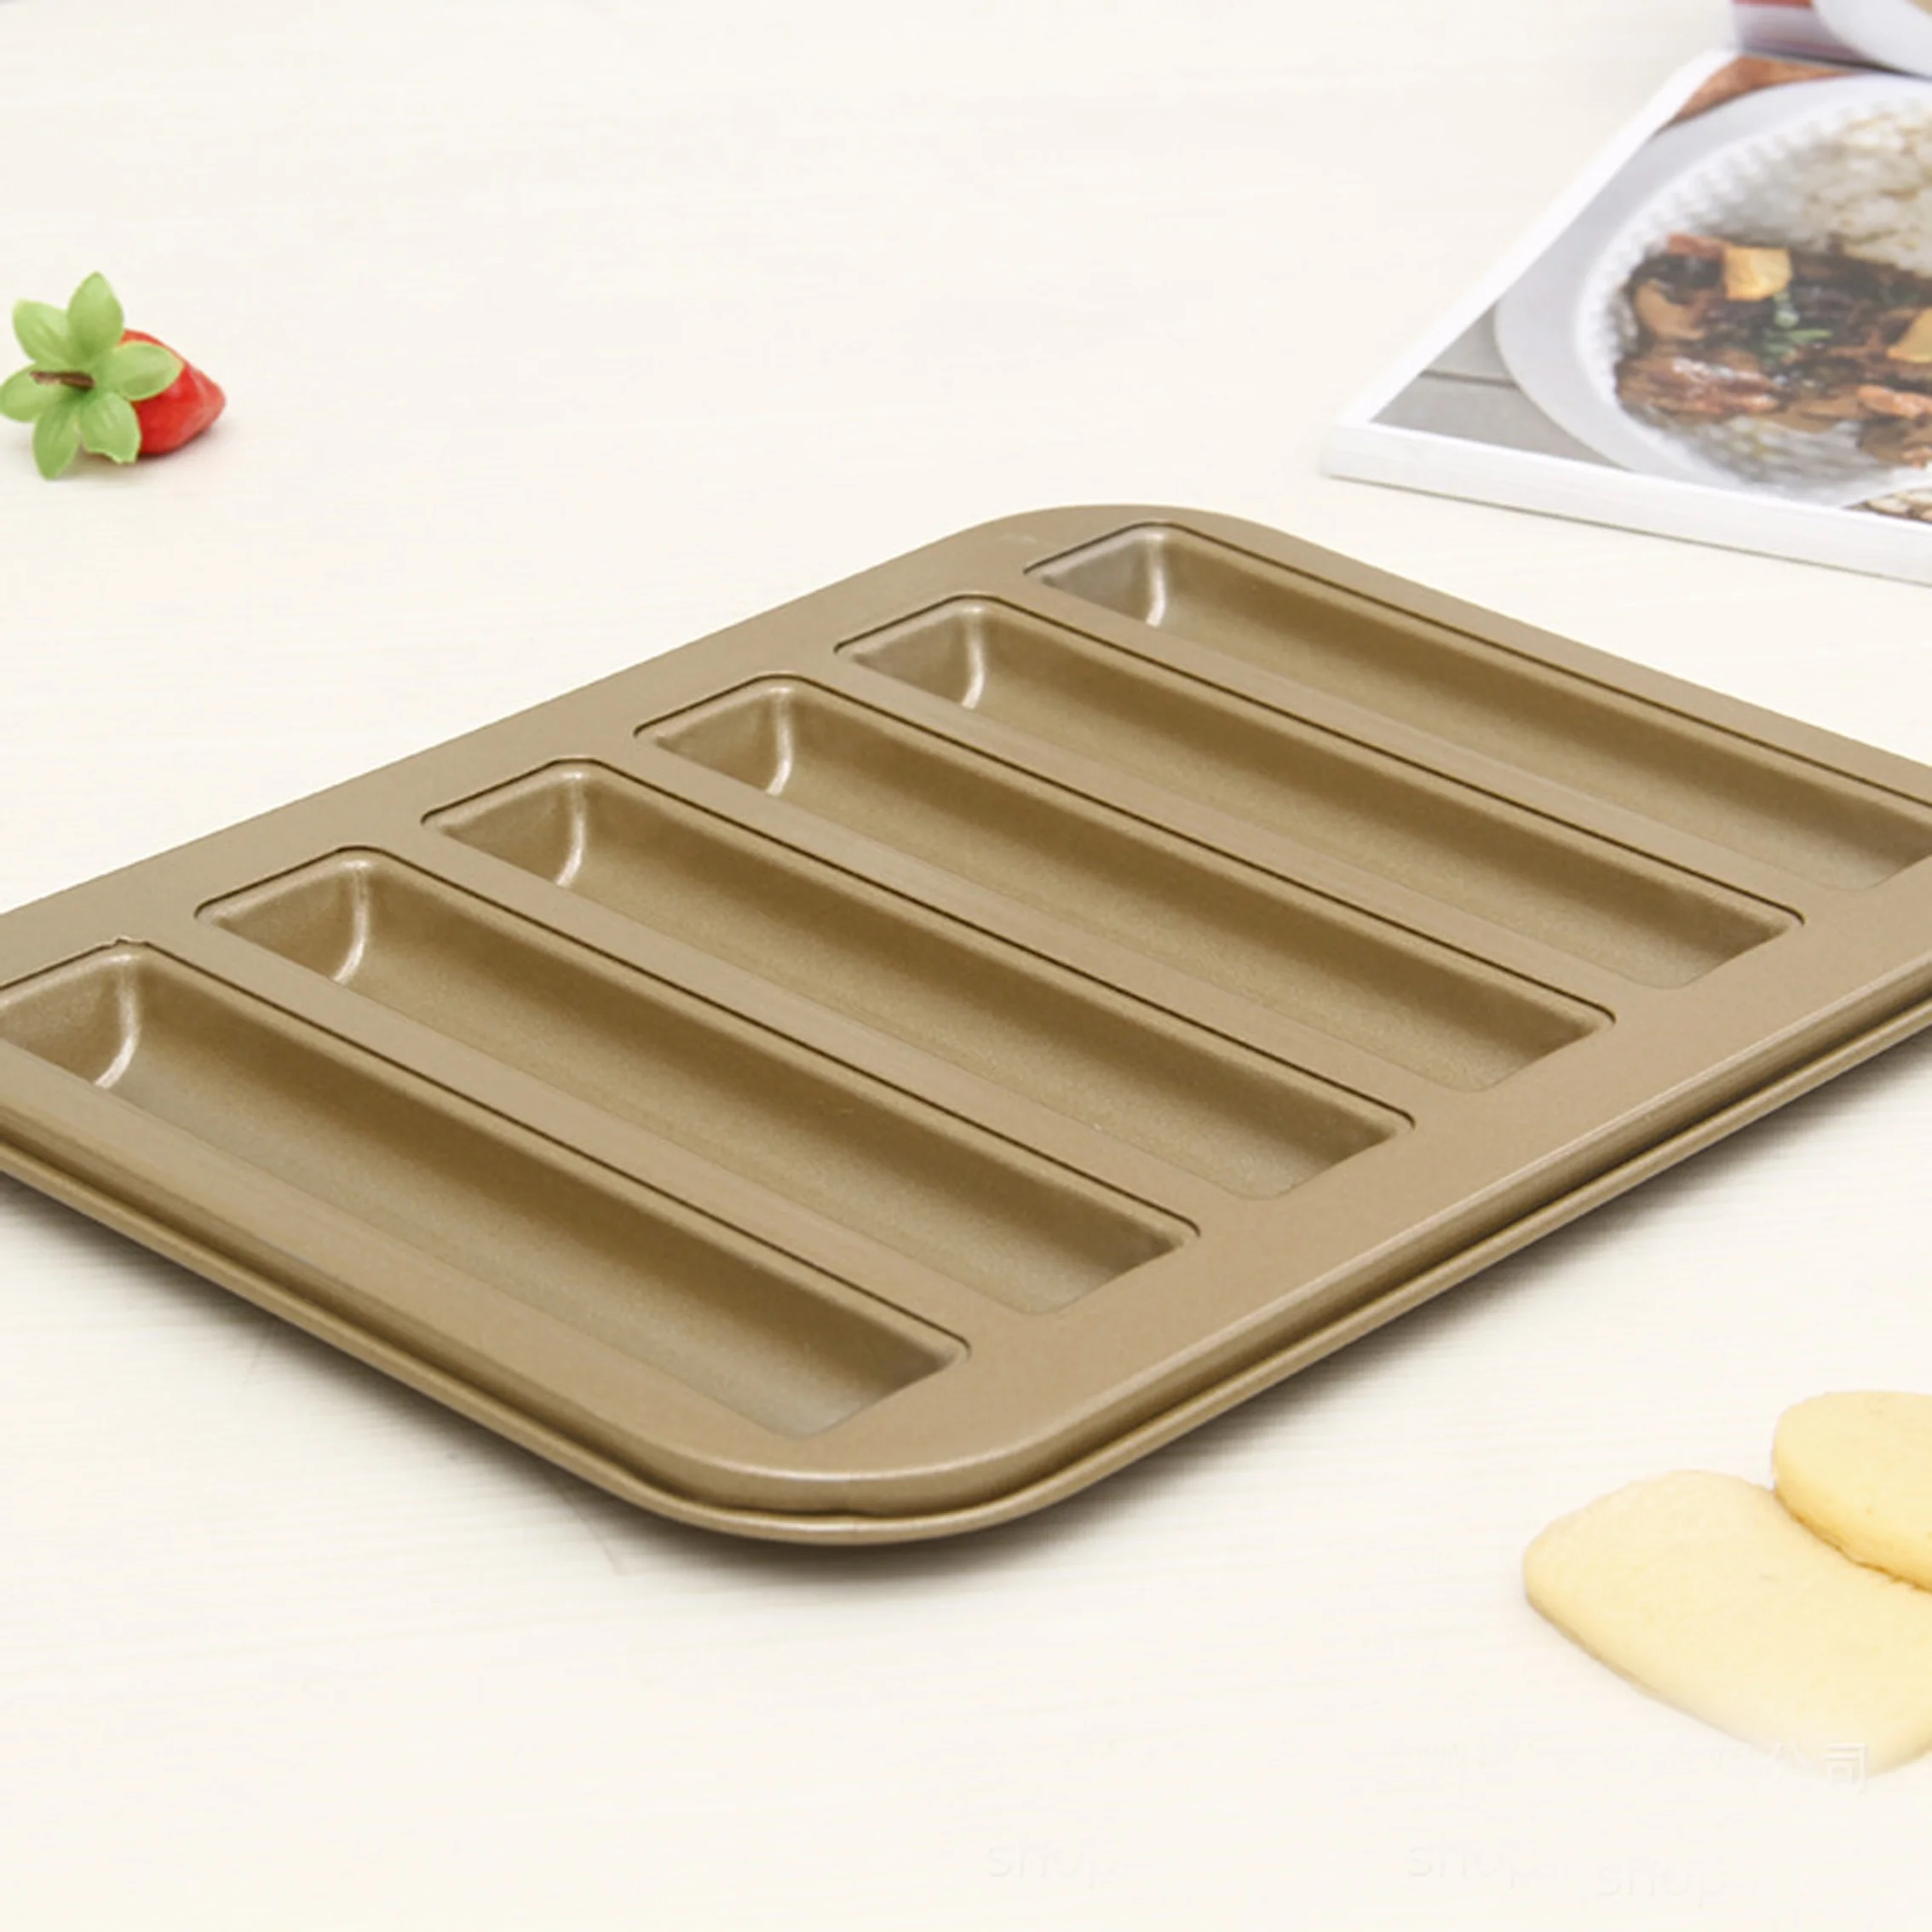 High Quality Bakeware Molds 6 Cups Non Stick Carbon Steel Cookie Baking Pan Cookie Baking Pan Kitchen Accessories Aluminum alloy cake molds